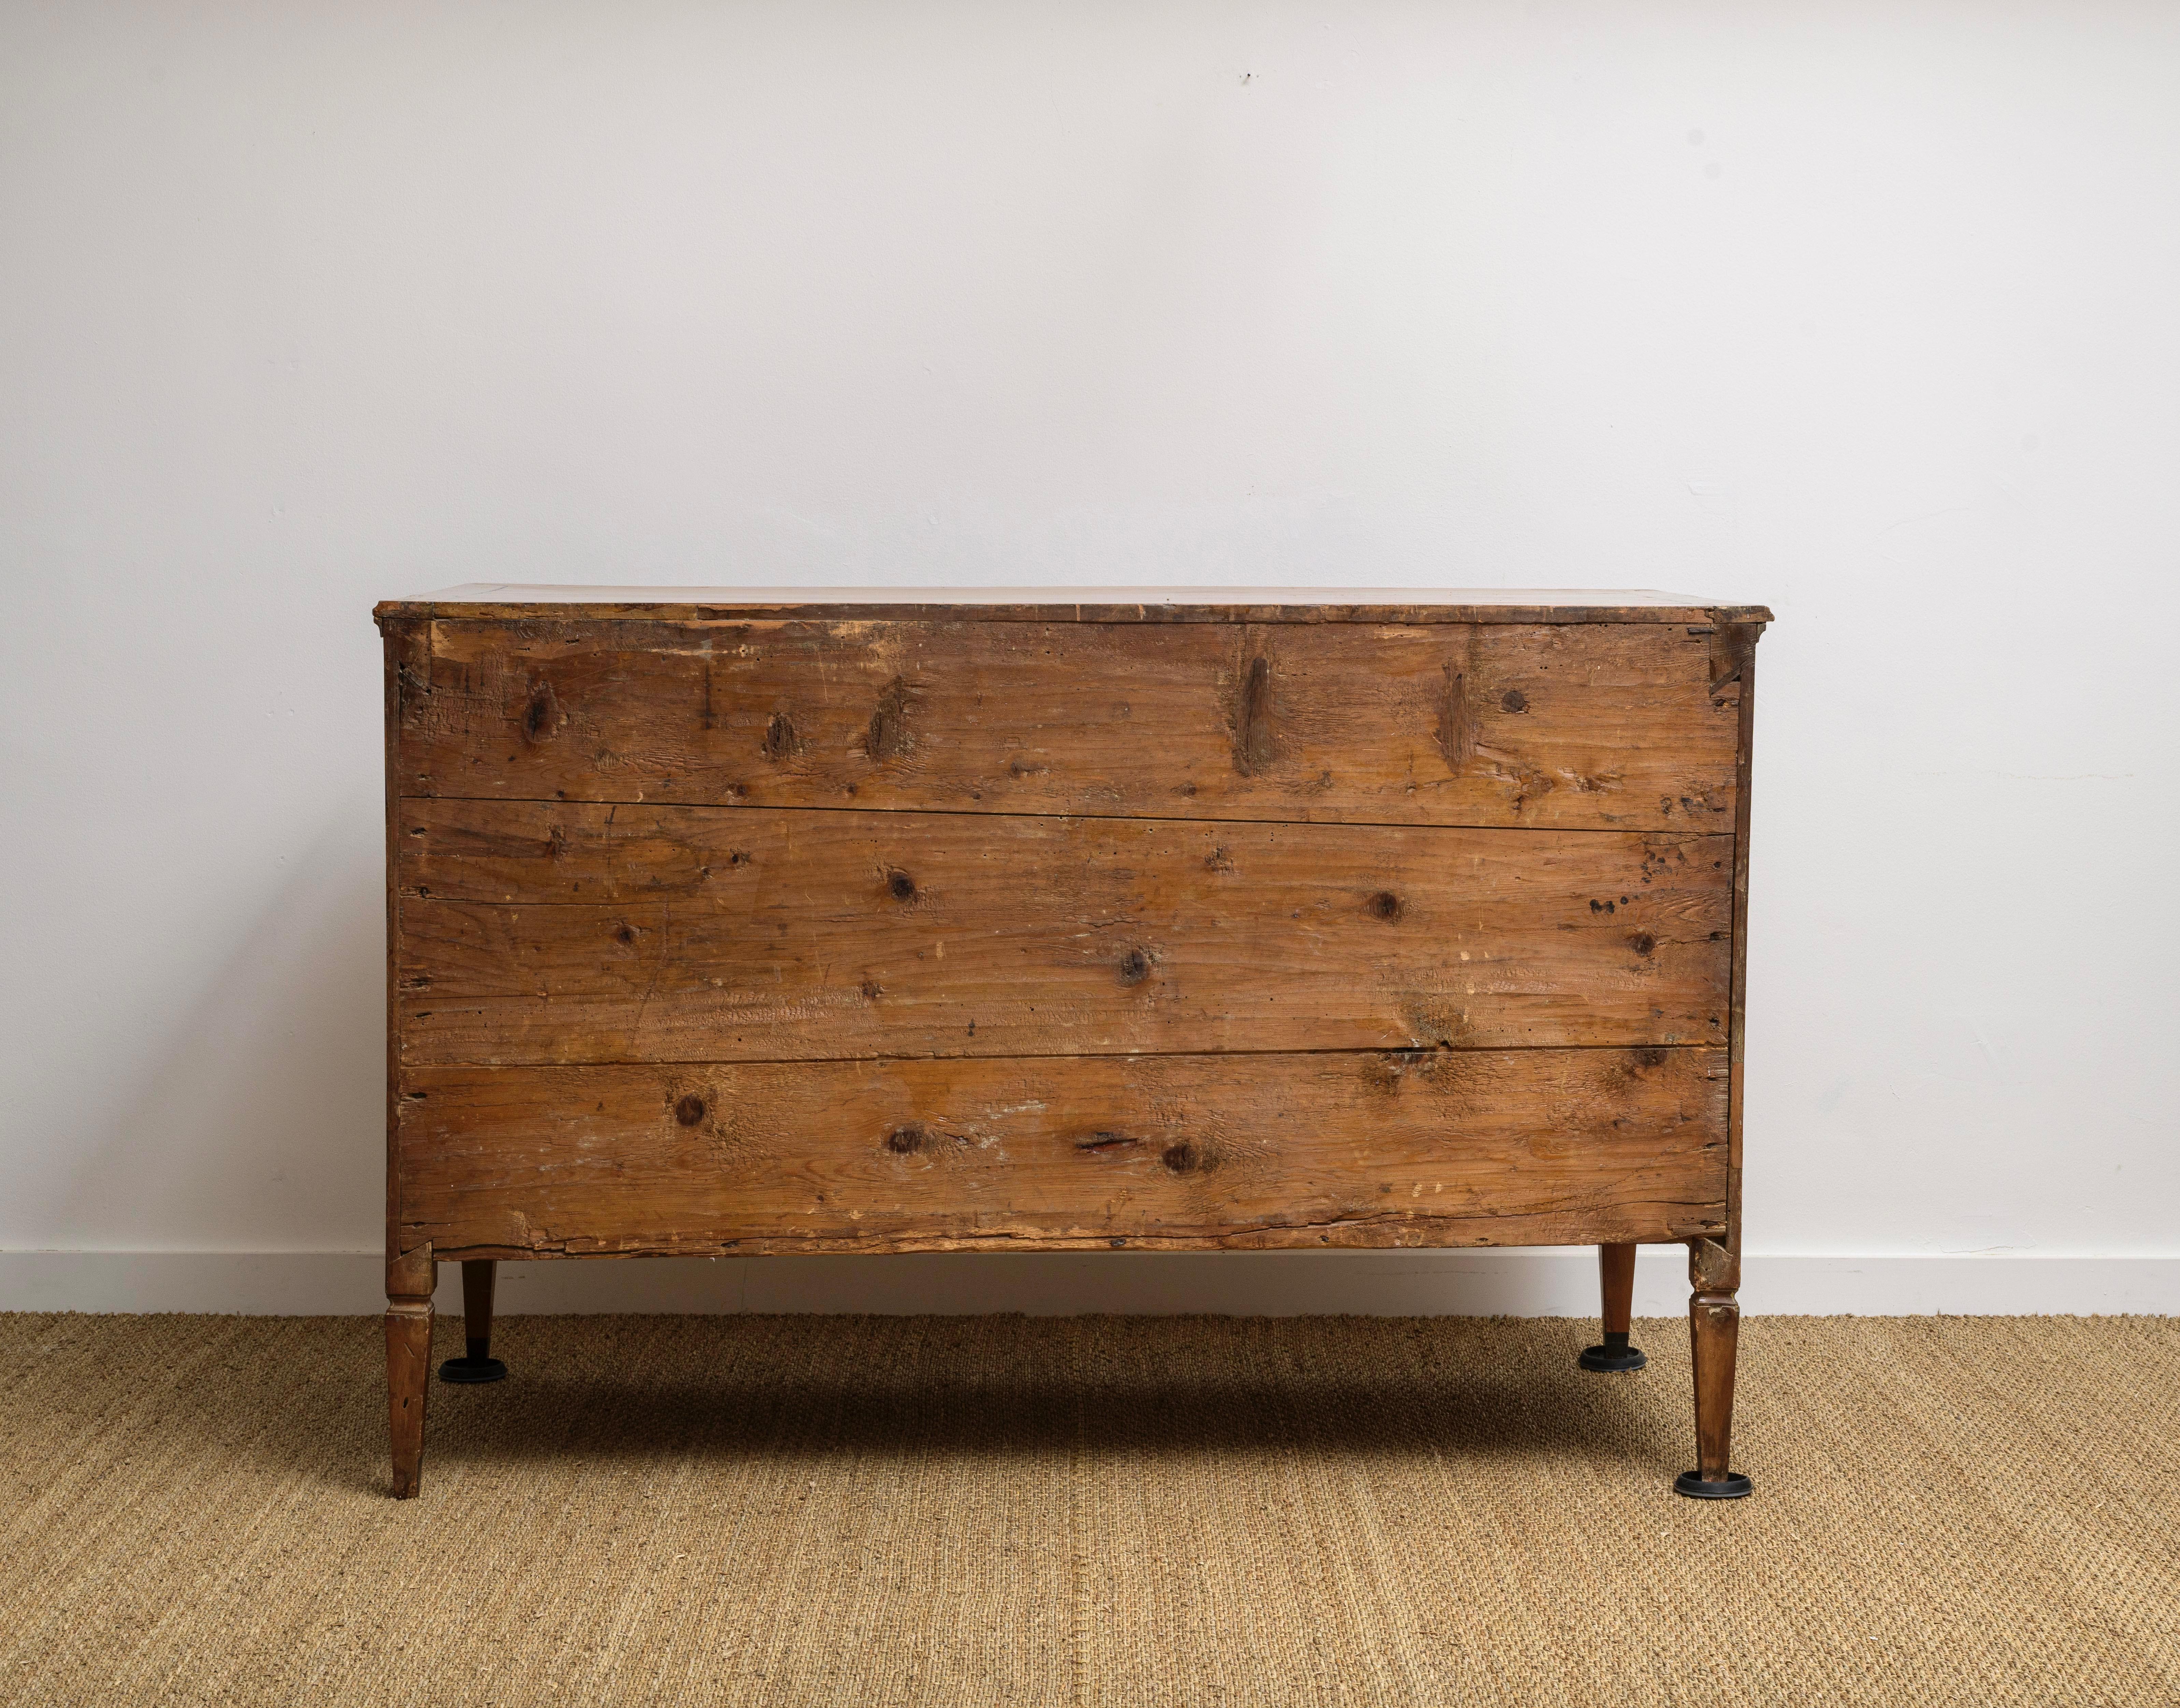 19th Century Italian Cherry Neoclacial-style Commode For Sale